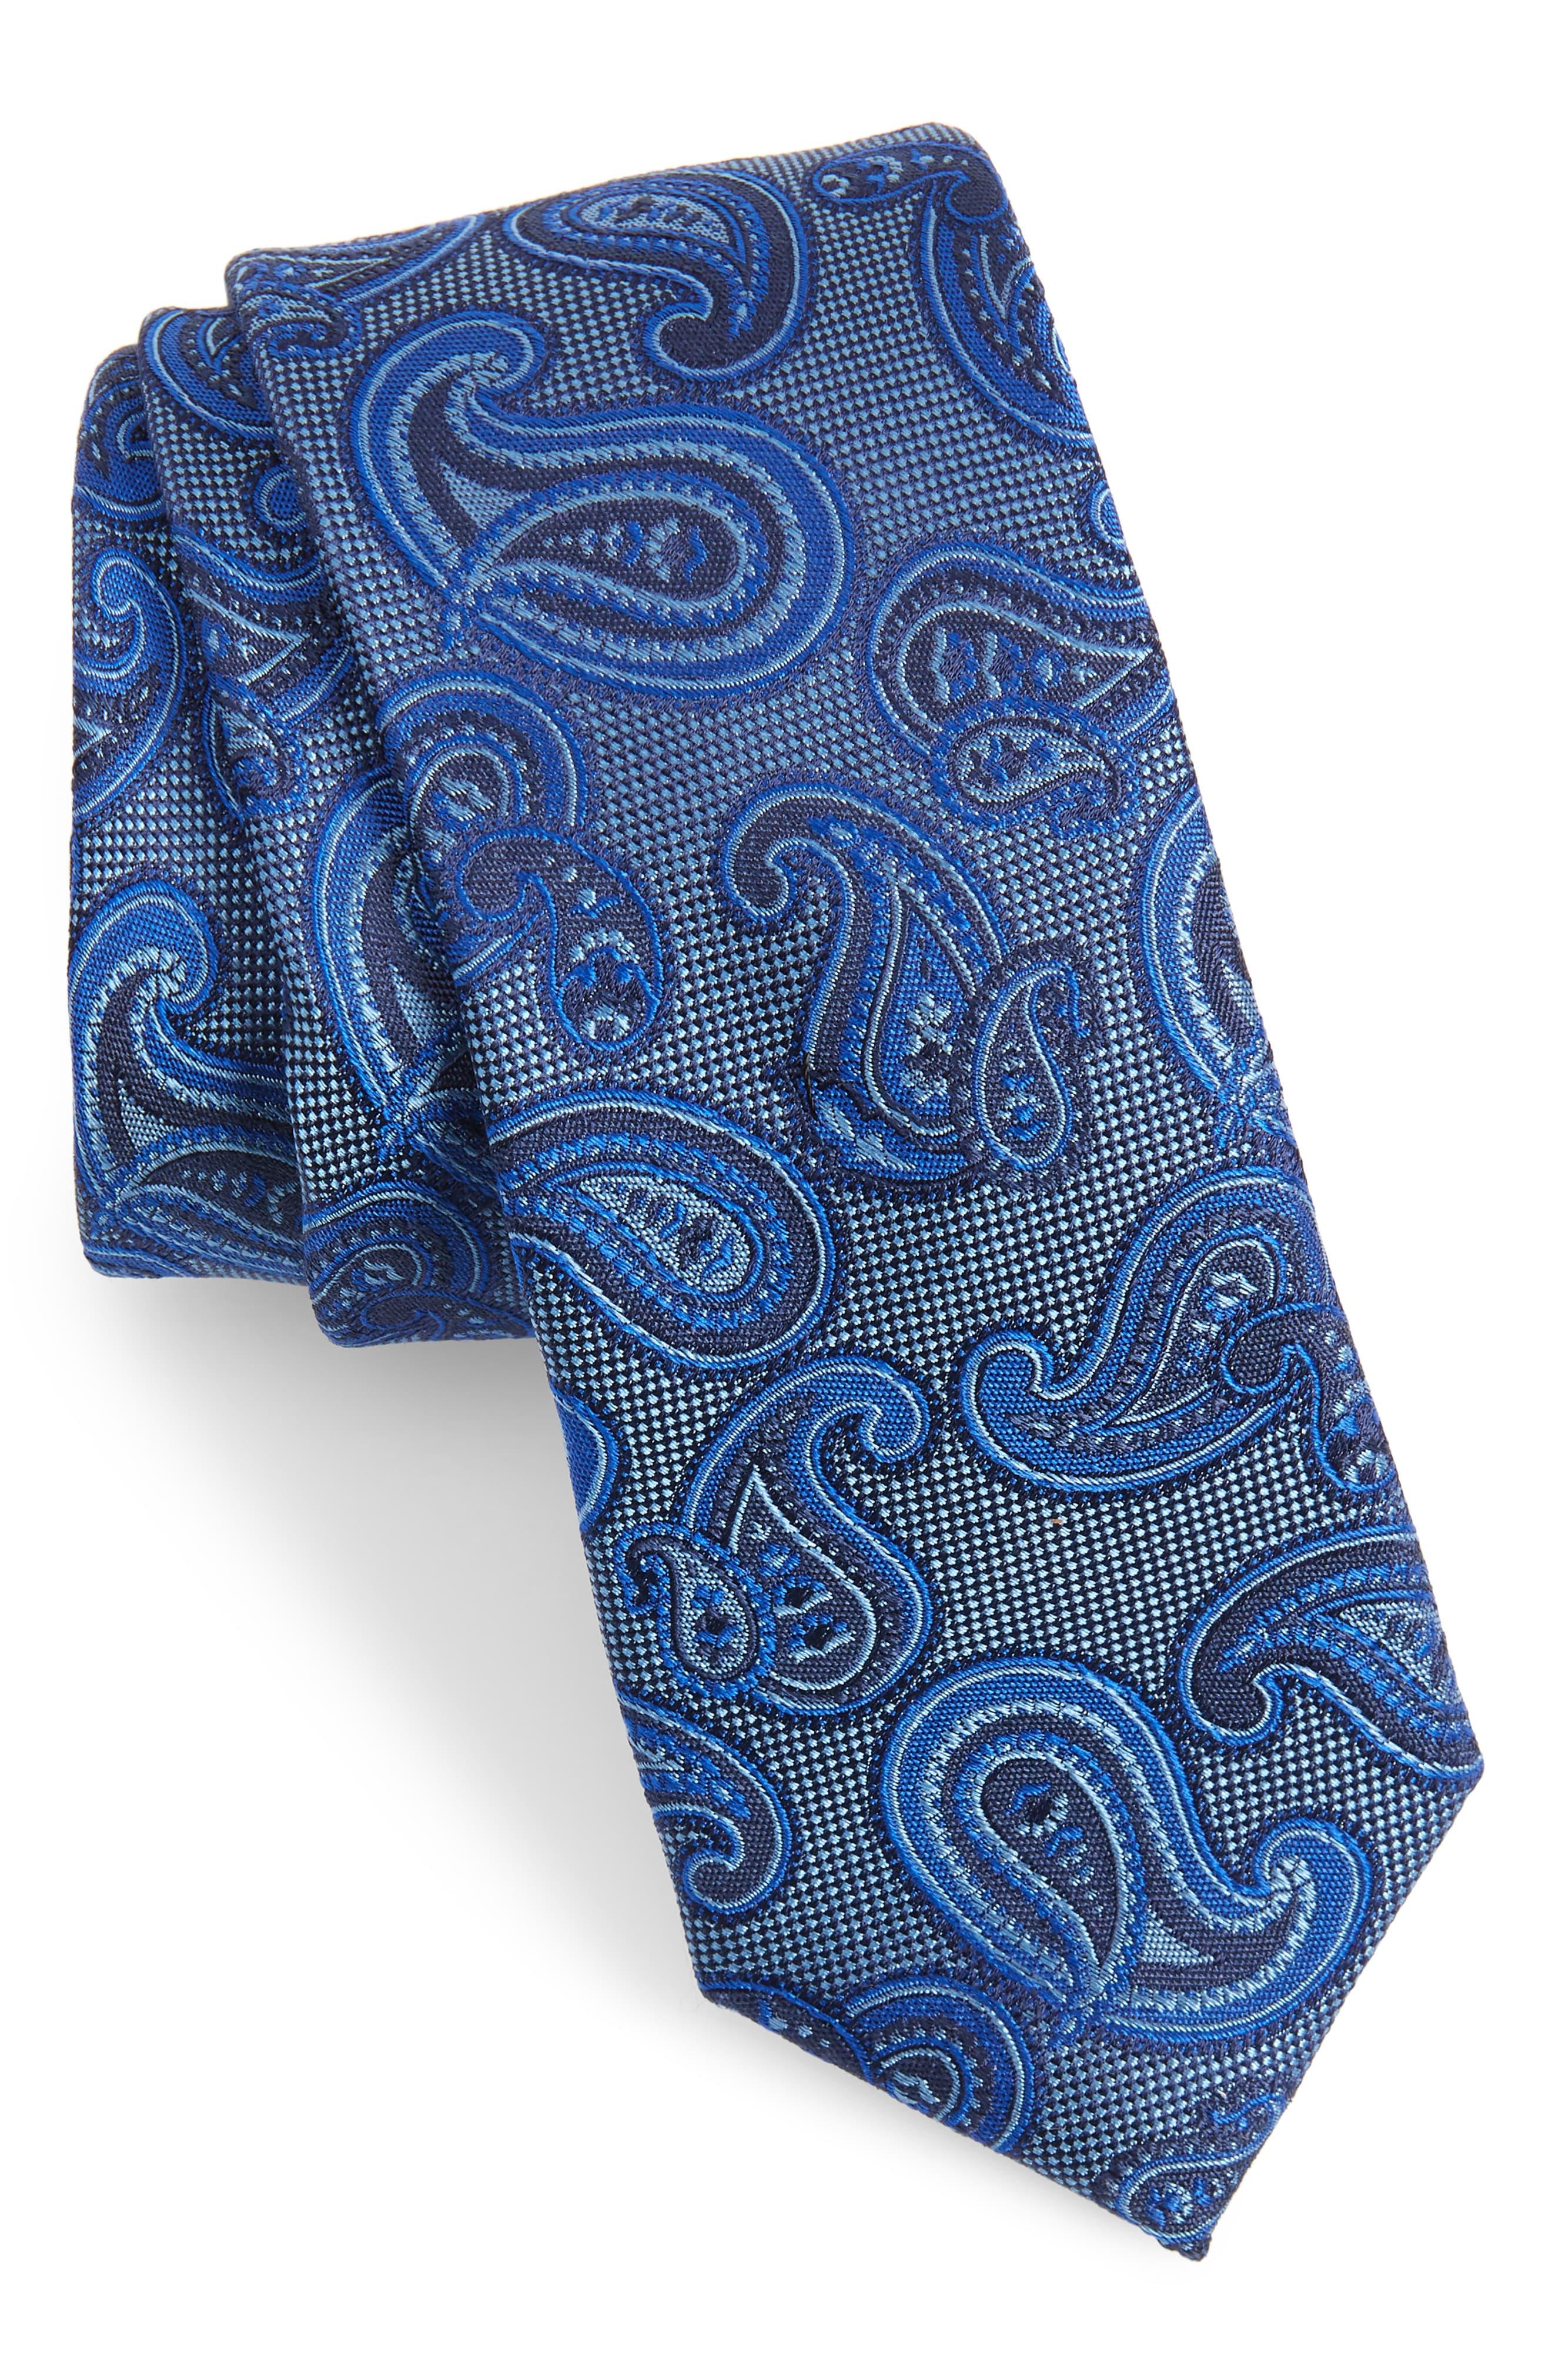 Ted Baker Tossed Pine Paisley Silk Tie in Blue for Men - Lyst